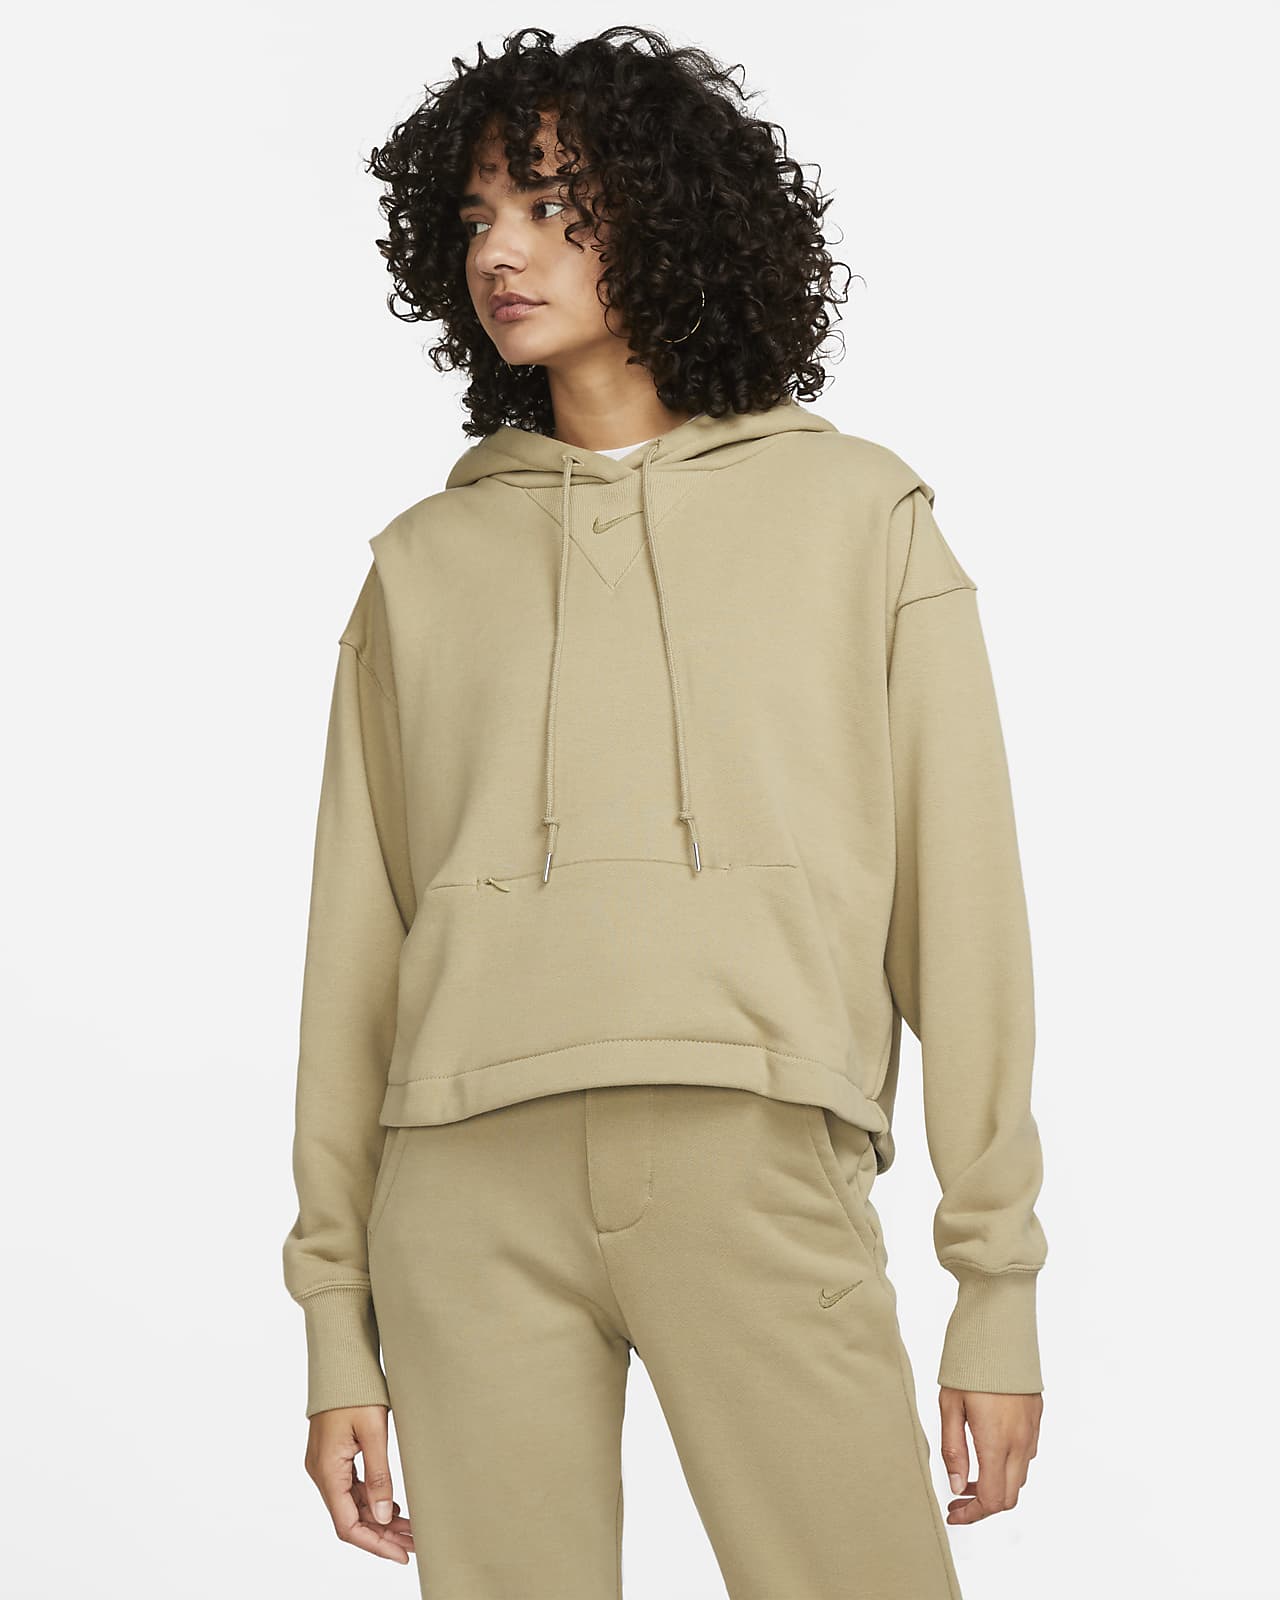 https://static.nike.com/a/images/t_PDP_1280_v1/f_auto,q_auto:eco/6a06d703-e47a-420a-b671-5486f9845521/sportswear-modern-fleece-oversized-french-terry-hoodie-6Qm3V6.png